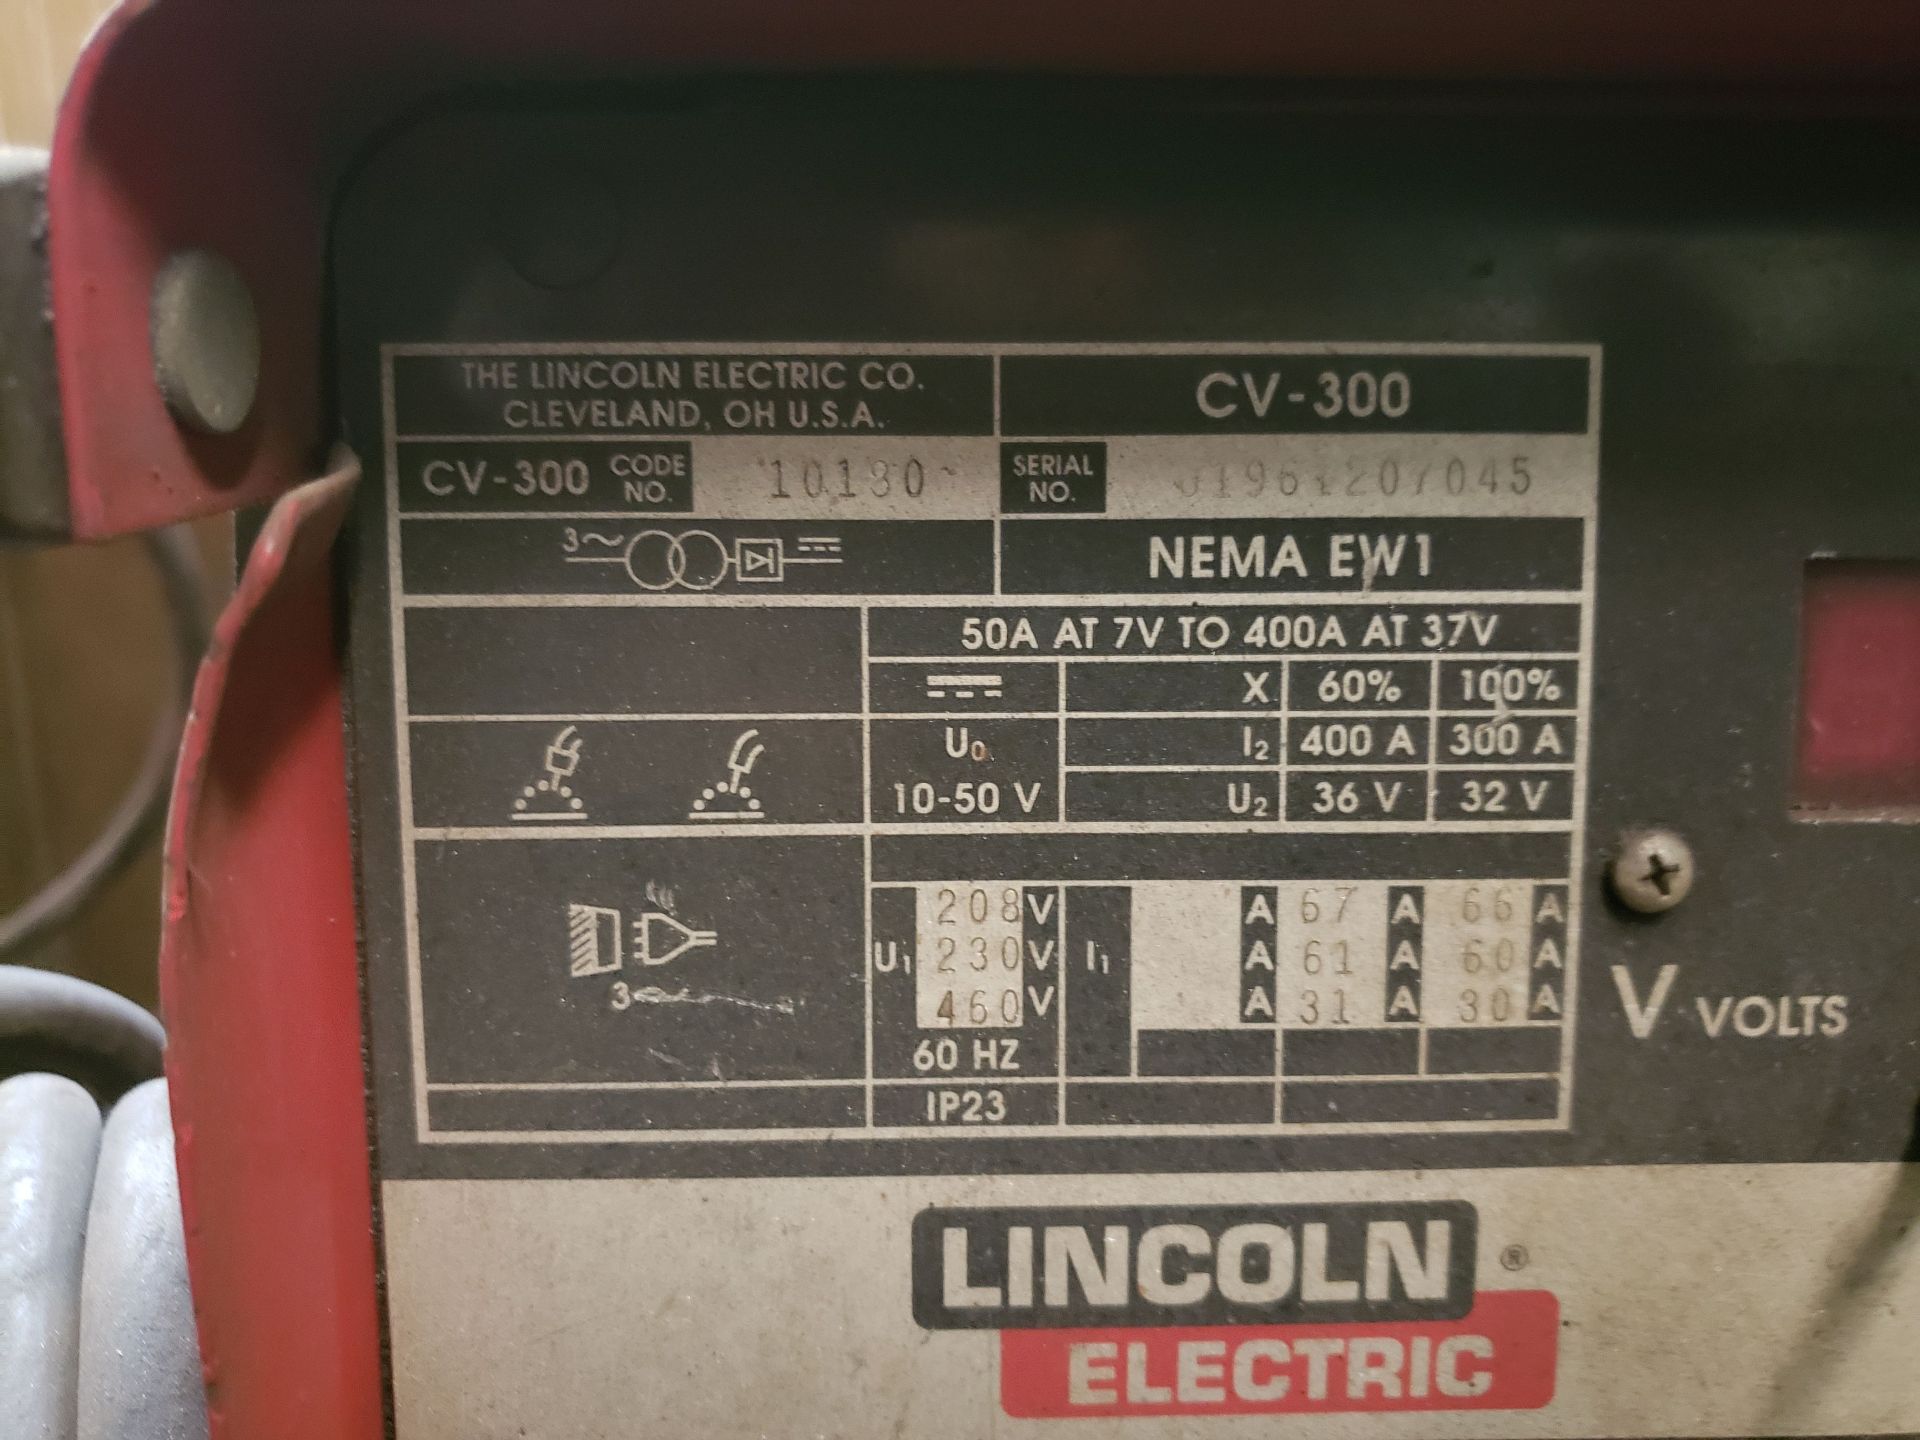 LINCOLN CV-300 WELDER SN- U1961207045, CODE 10180, ON ROLLER CART WITH LN-7 WIRE FEED - Image 2 of 2